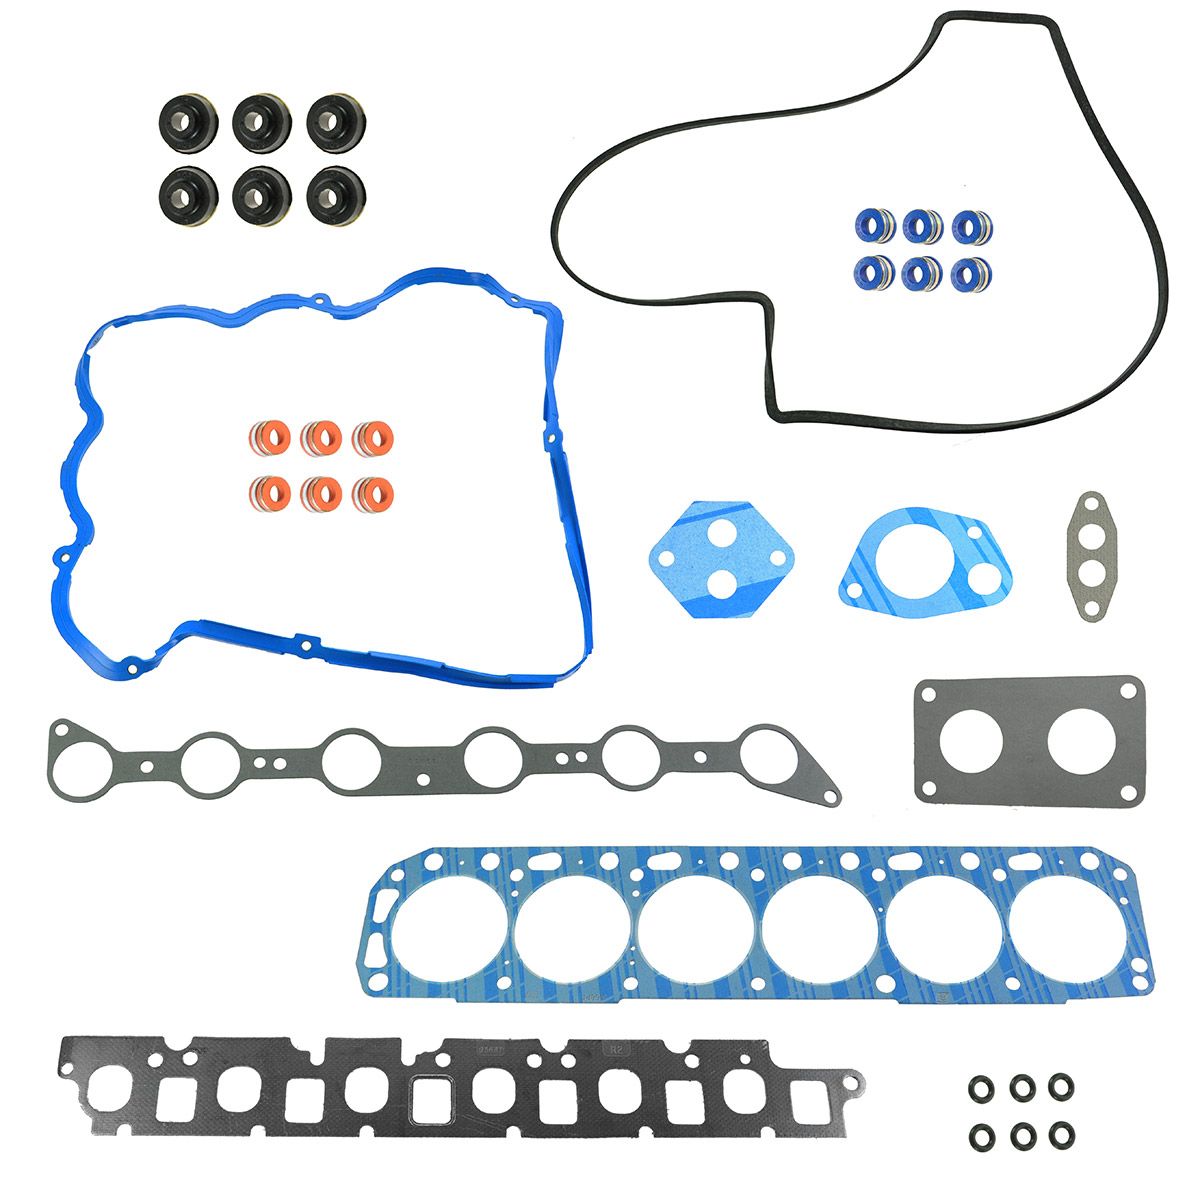 Flathead ford head gasket replacement asbestos #10